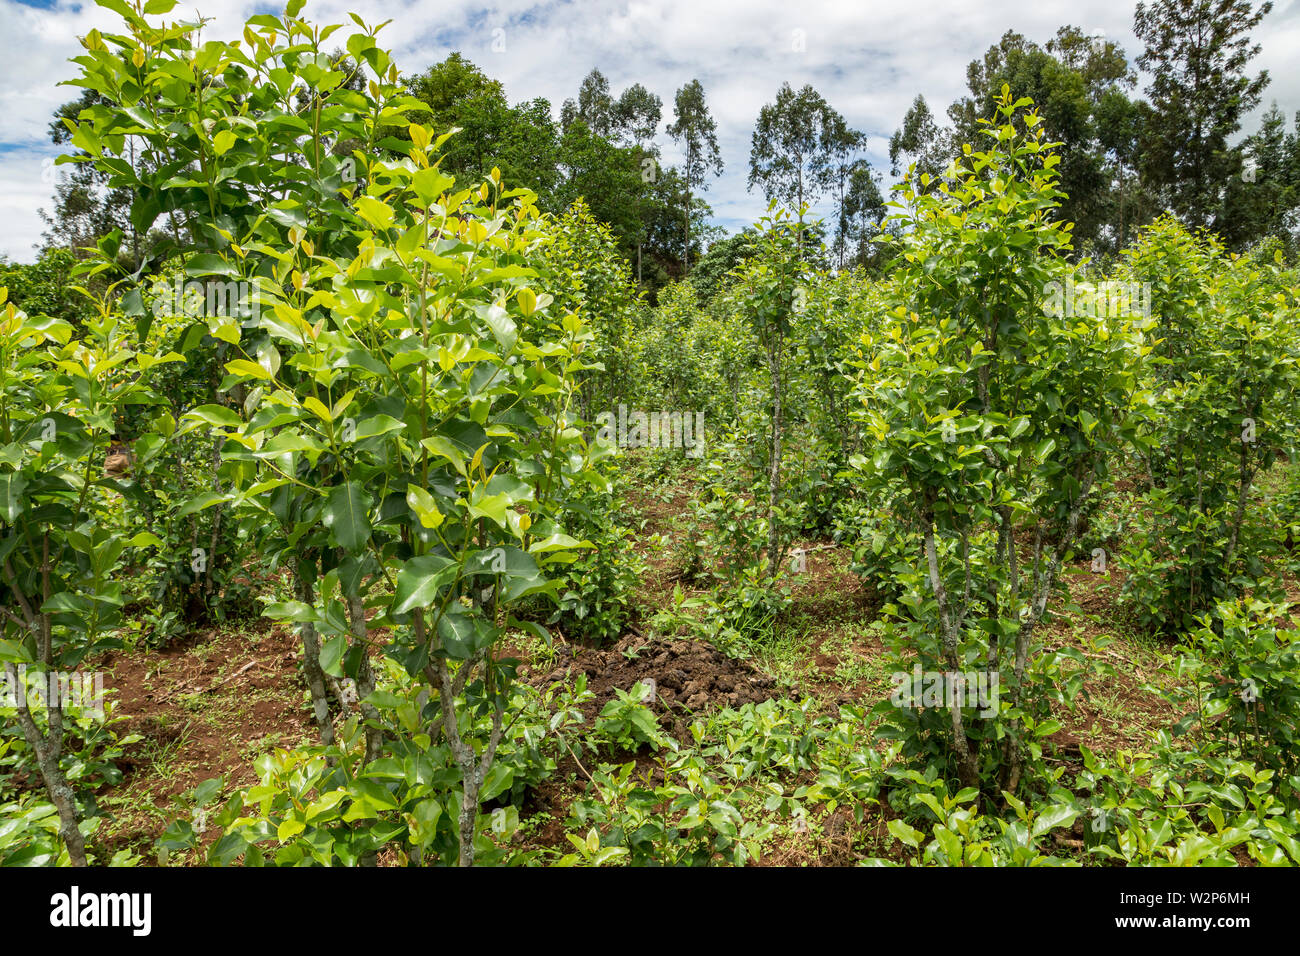 Young male farmer with khat plant on farm in Illubabor, Ethiopia Stock Photo